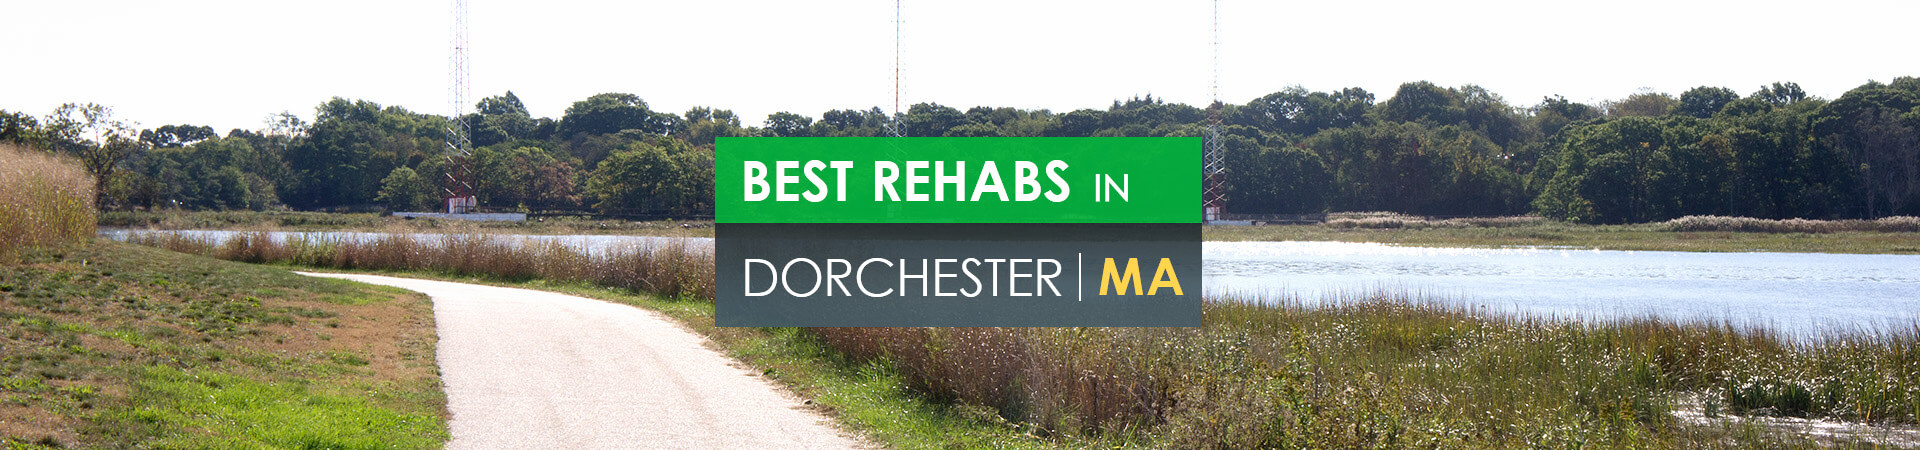 Best rehabs in Dorchester, MA